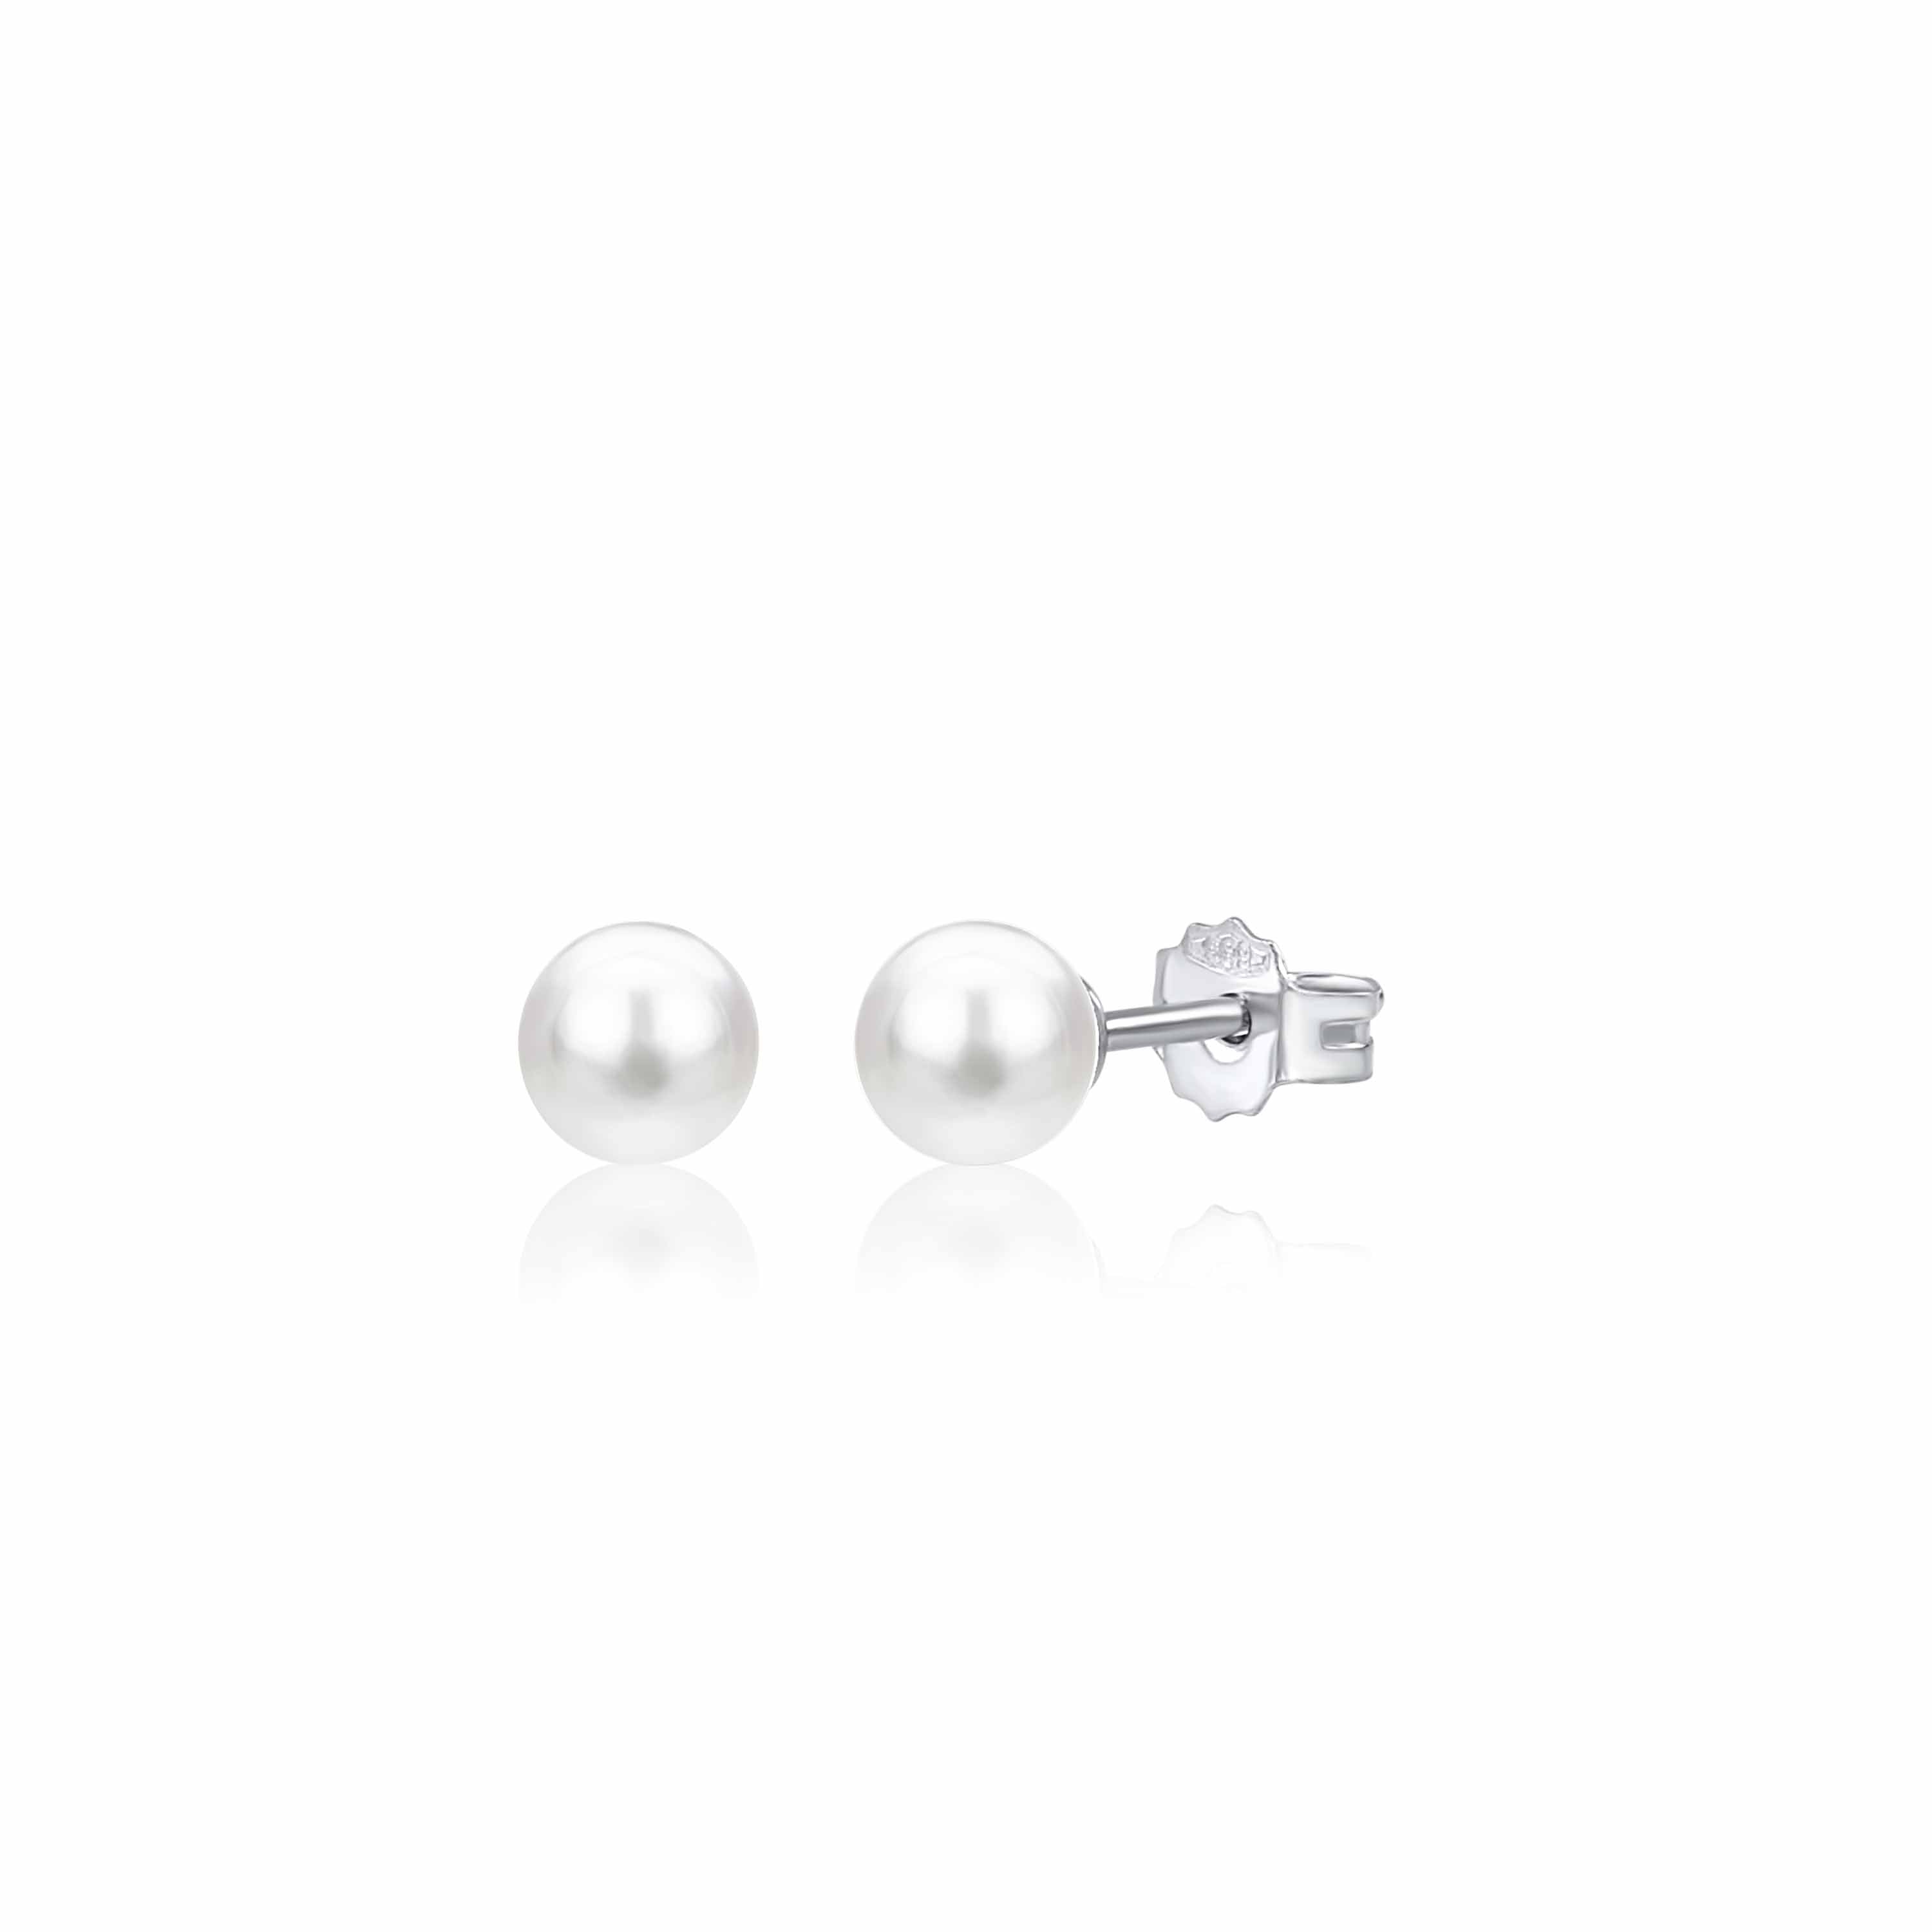 UNICORNJ 14K White Gold Freshwater Cultured Pearl Post Stud Earrings 5 6 or 7mm Italy